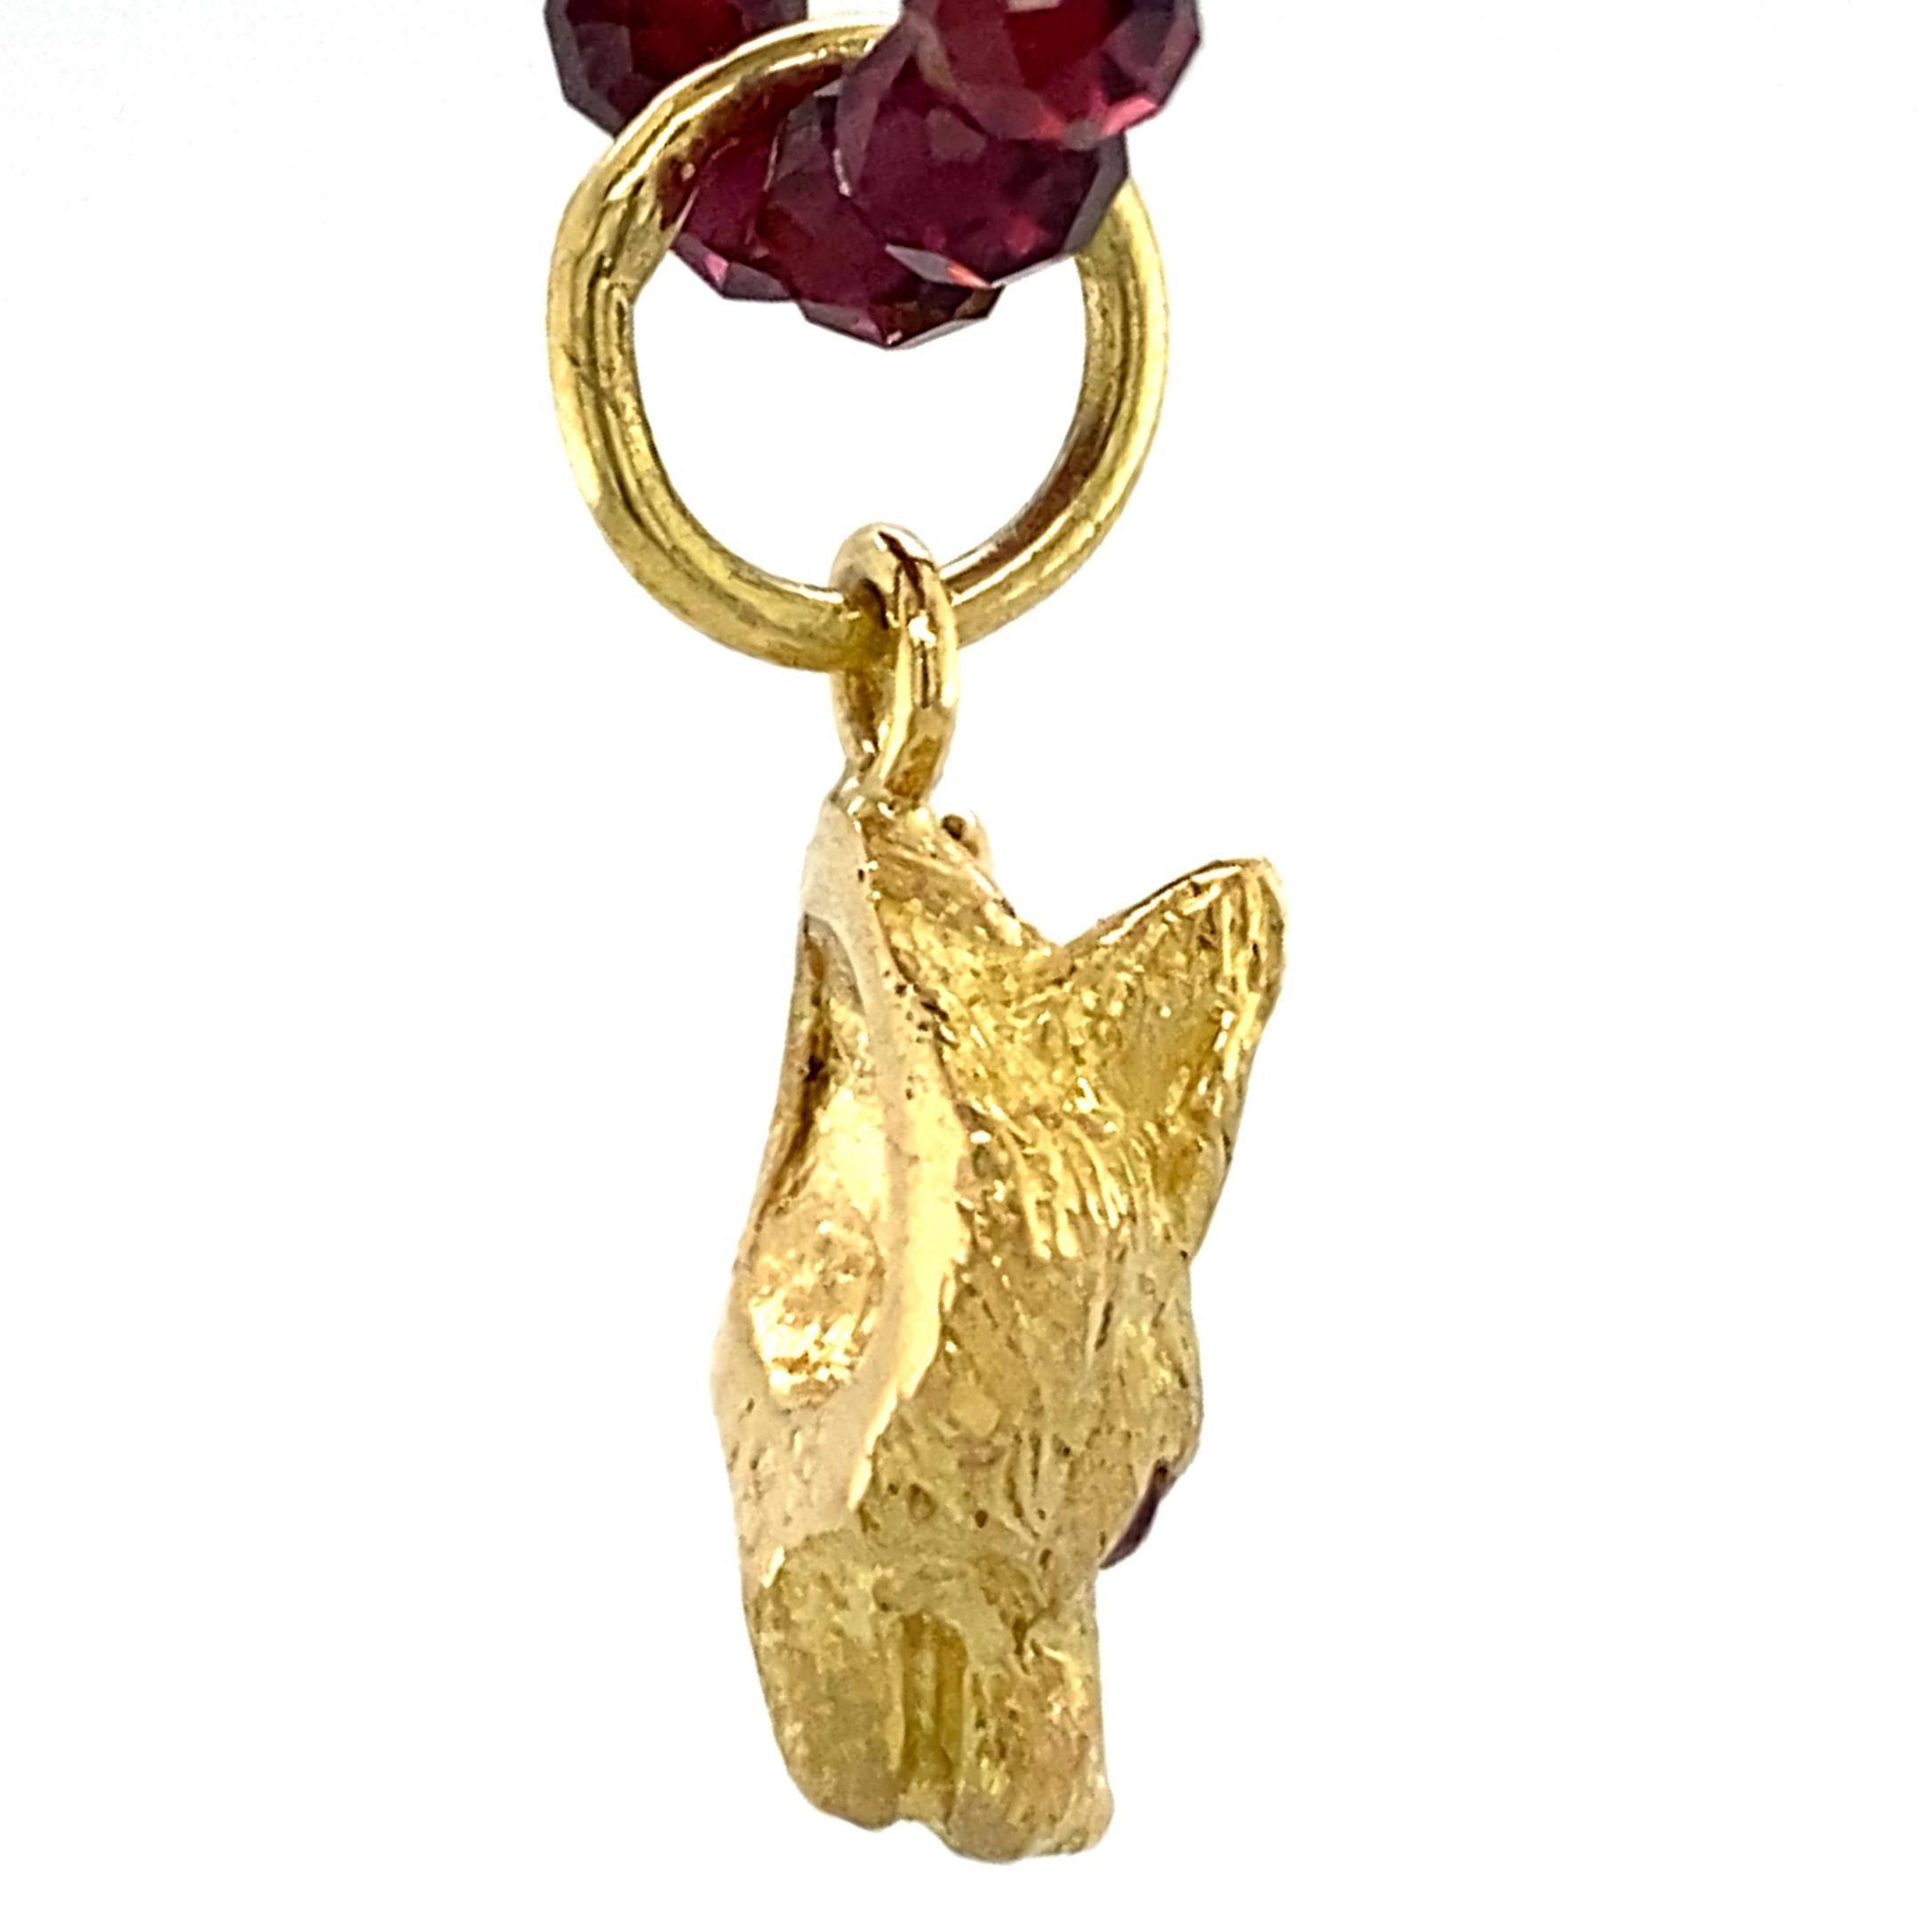 Small Fox or Wolf Pendant with Ruby Eyes in 18K Gold on Faceted Garnet Chain 5